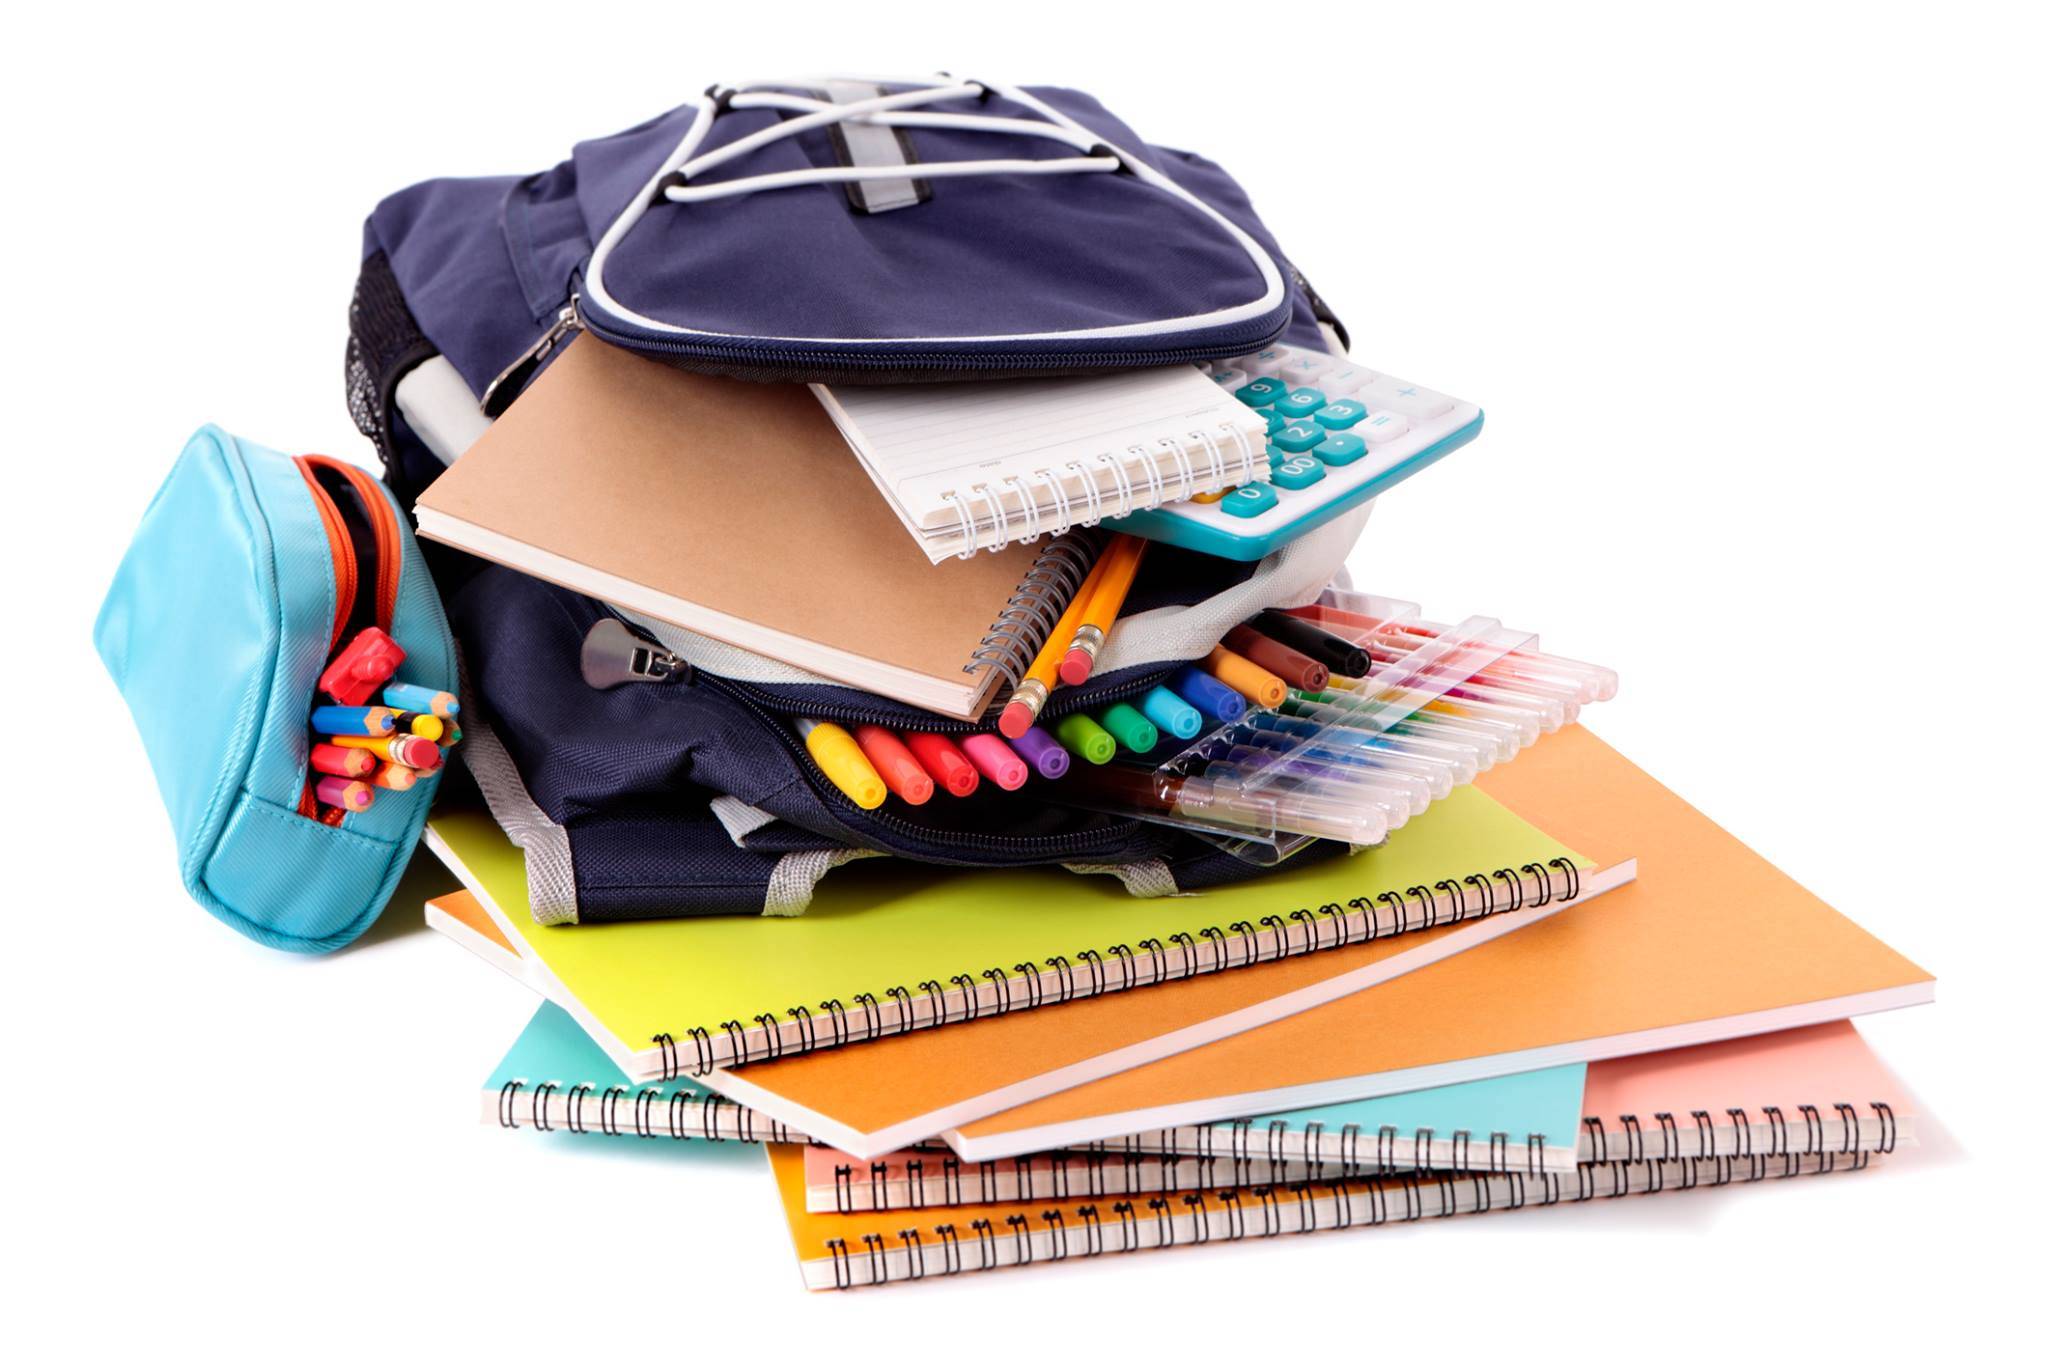 Three Spinners is collecting school supplies for C-U youth in need